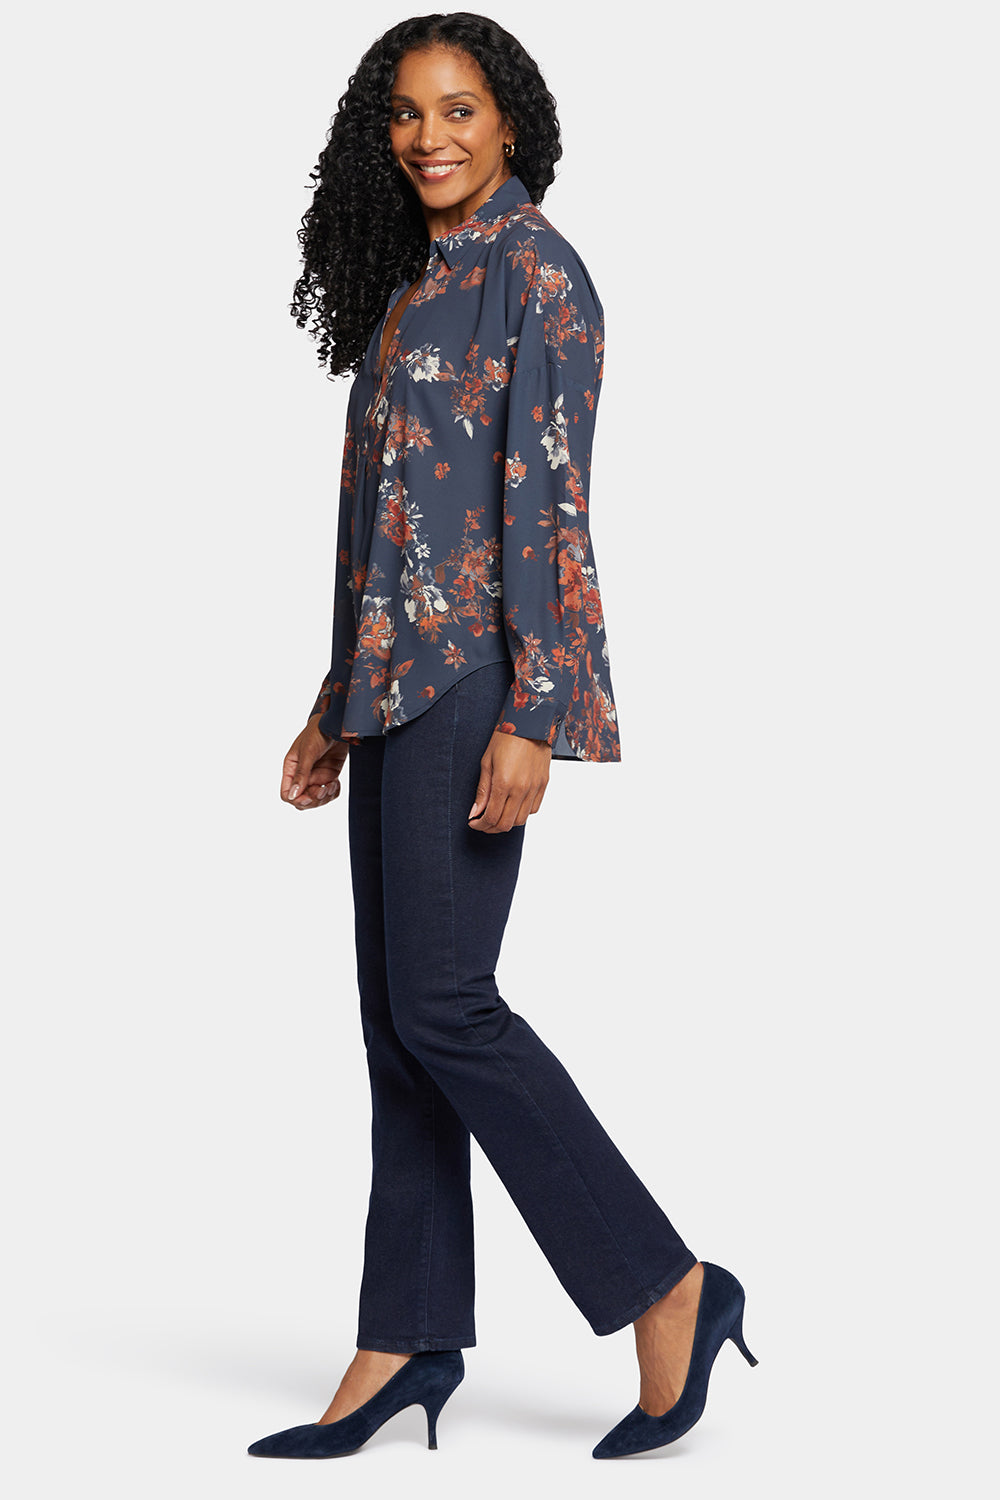 NYDJ Becky Blouse  - Belleview